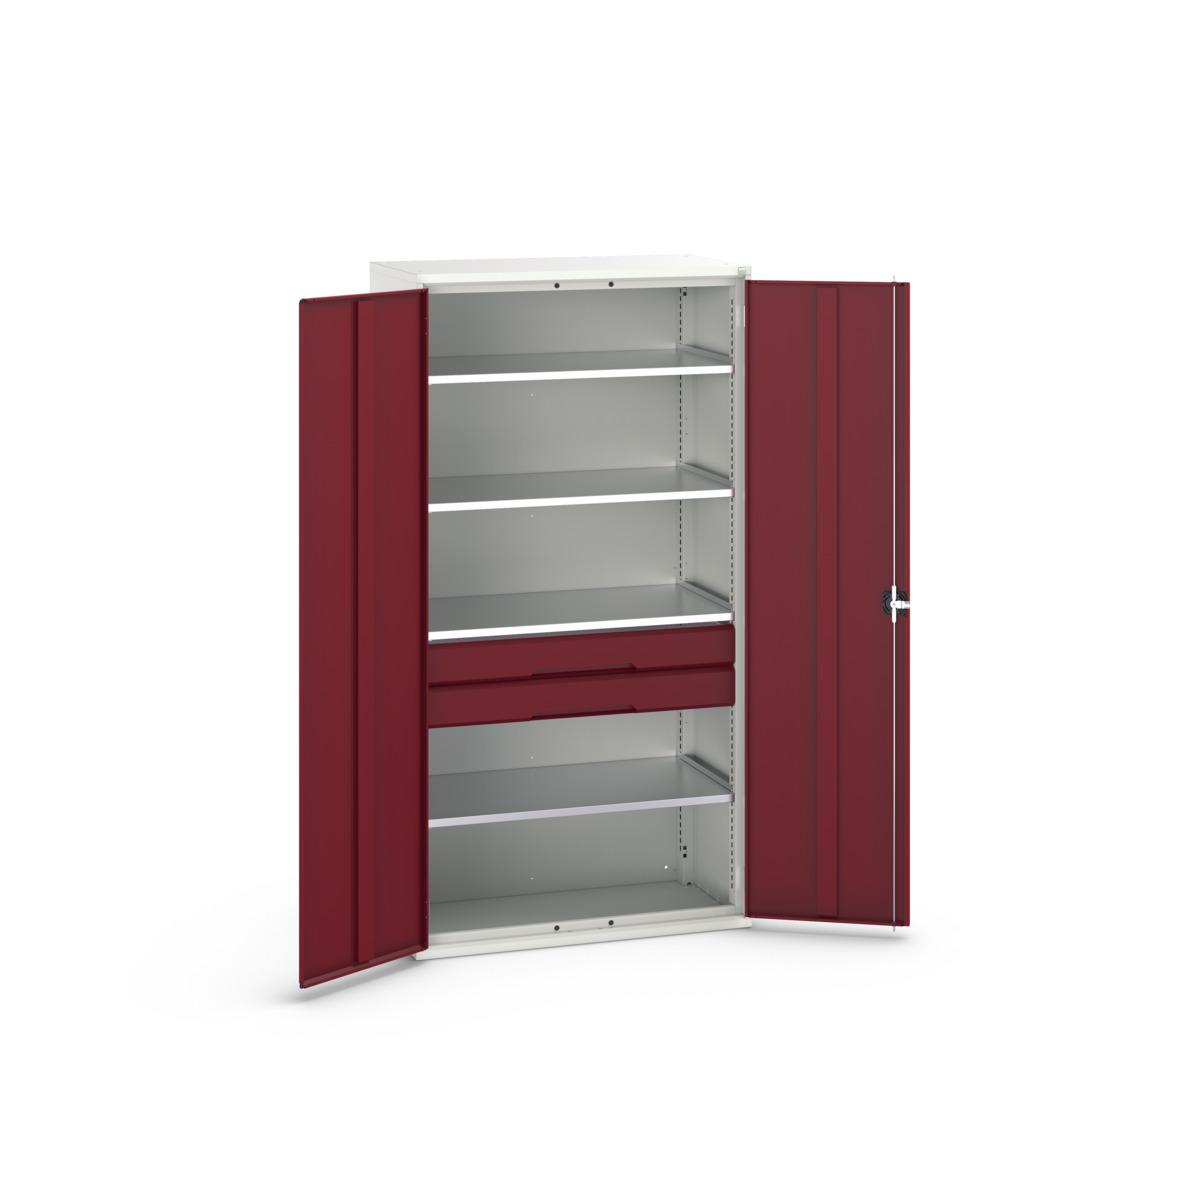 16926574.24 - verso kitted cupboard